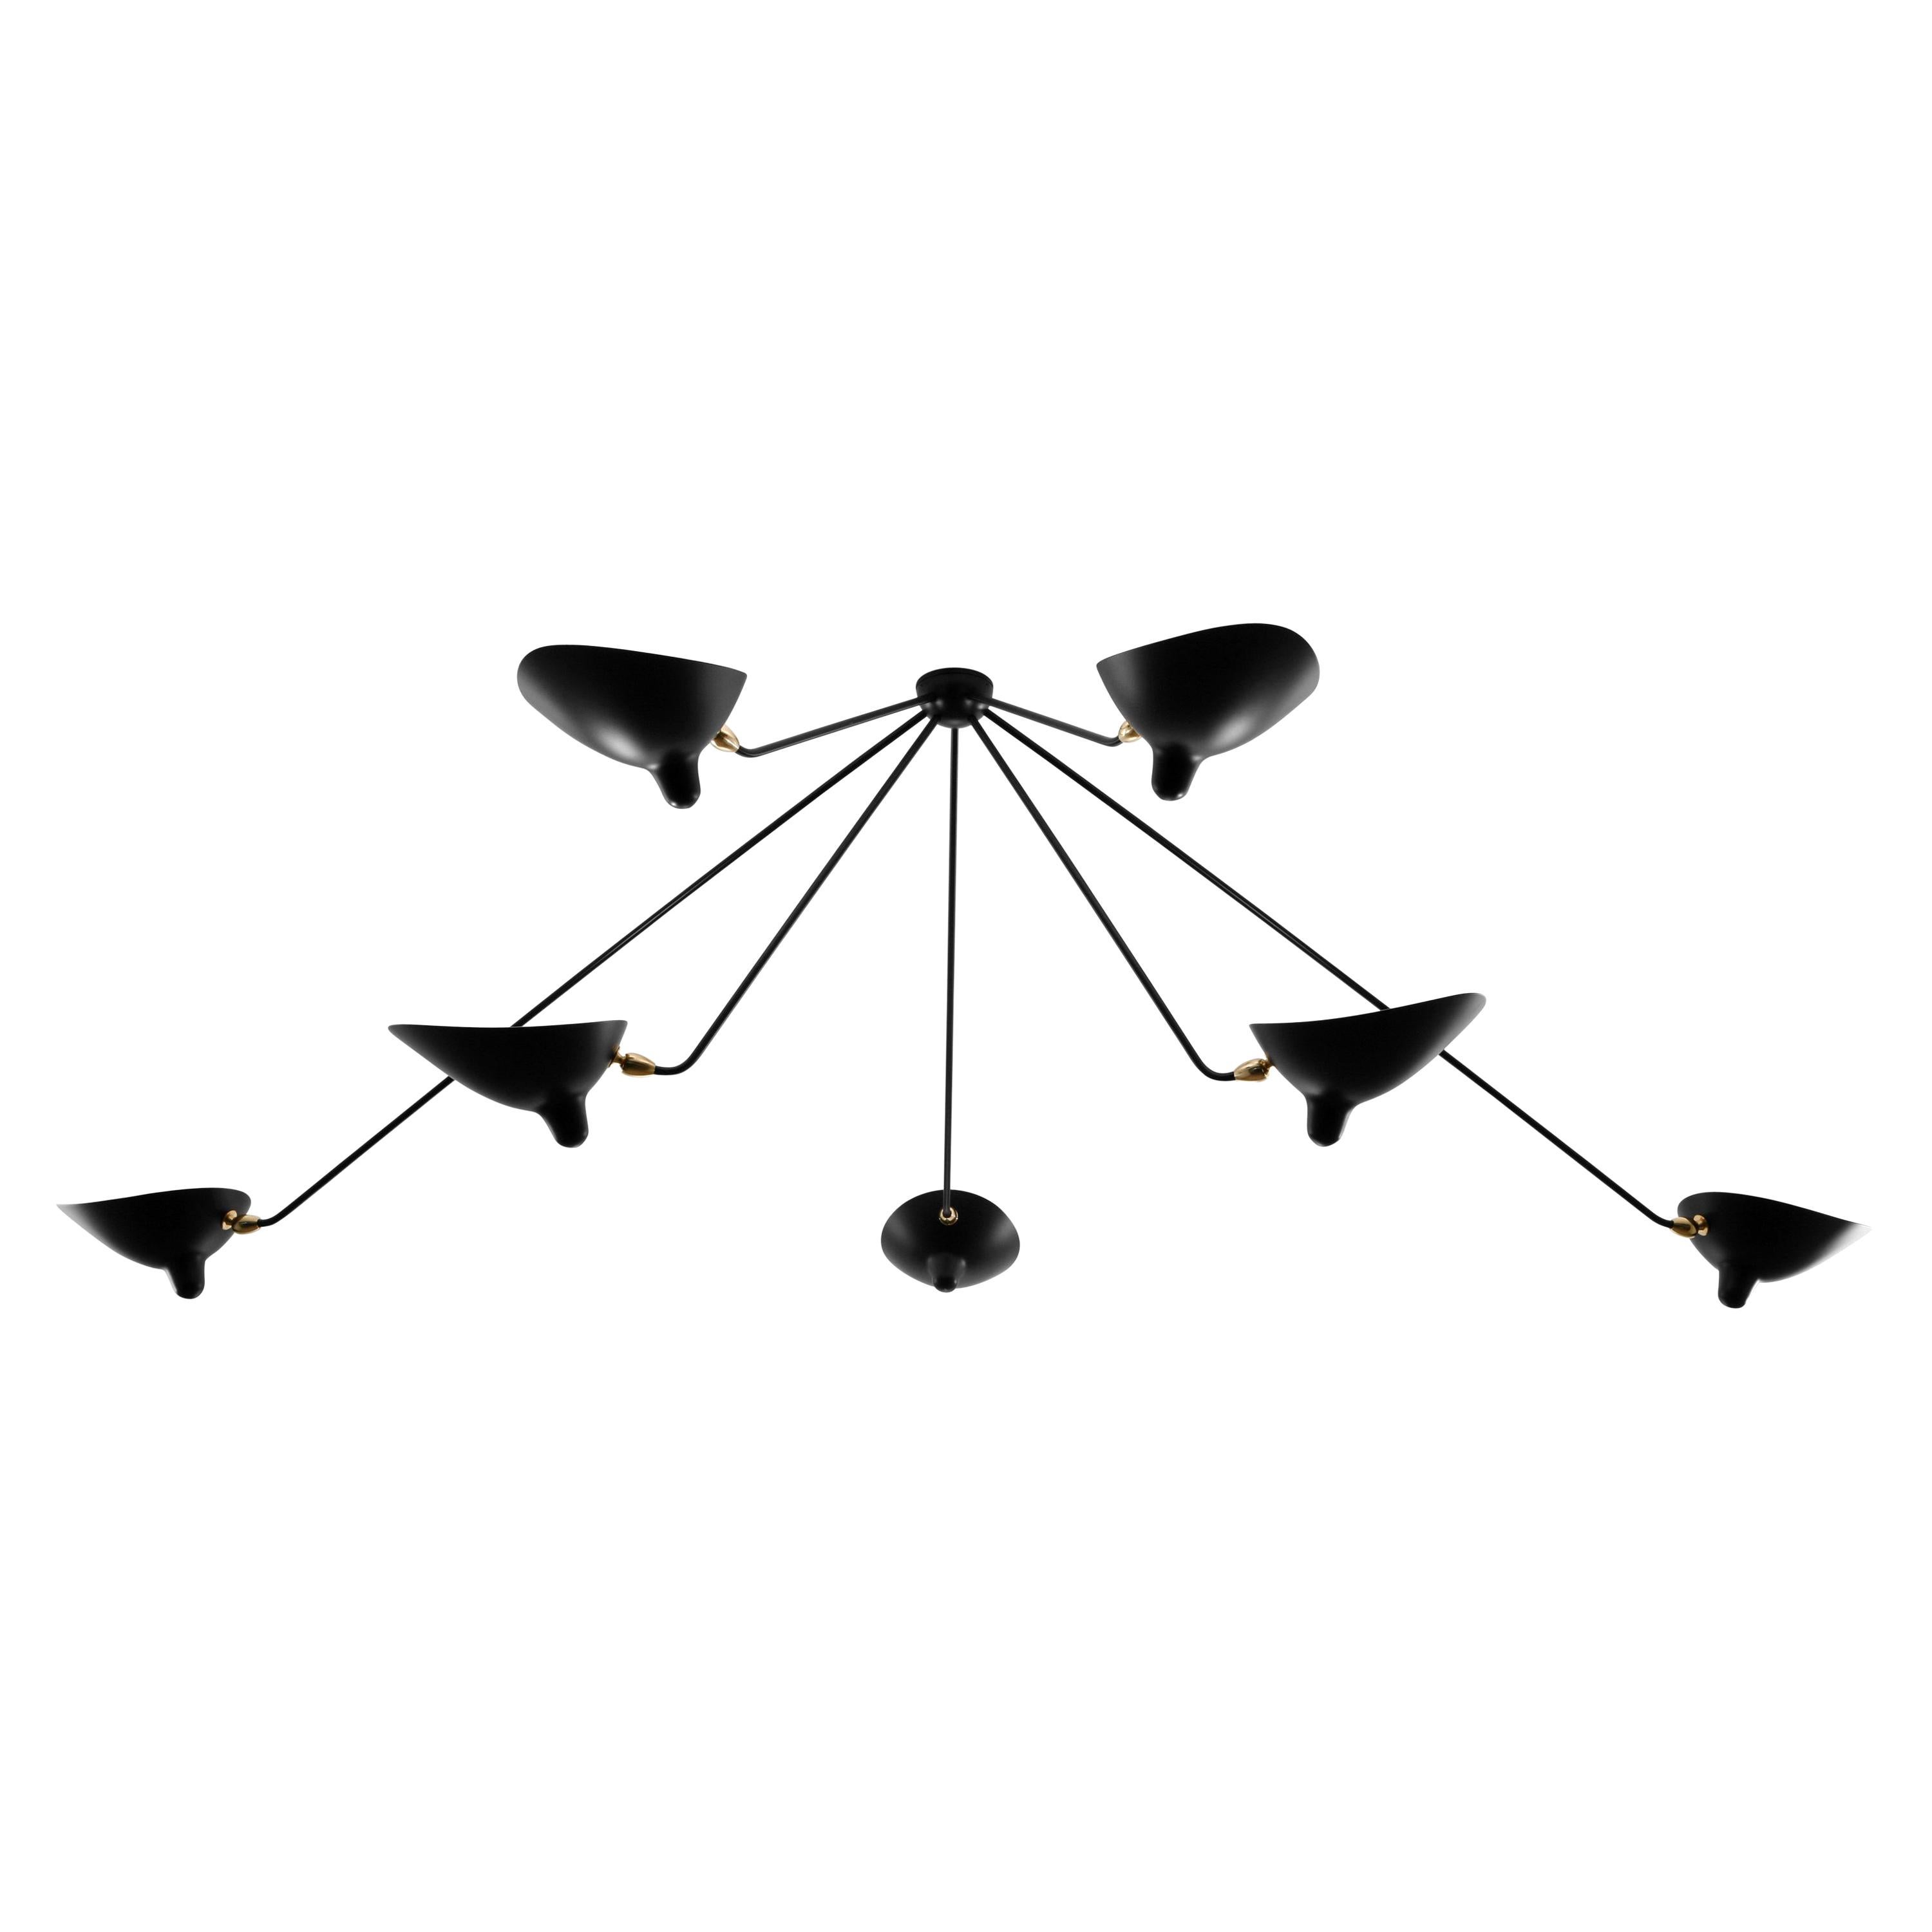 Ceiling Pendant Spider Lamp with Seven Fixed Arms by Les Editions, Serge Mouille